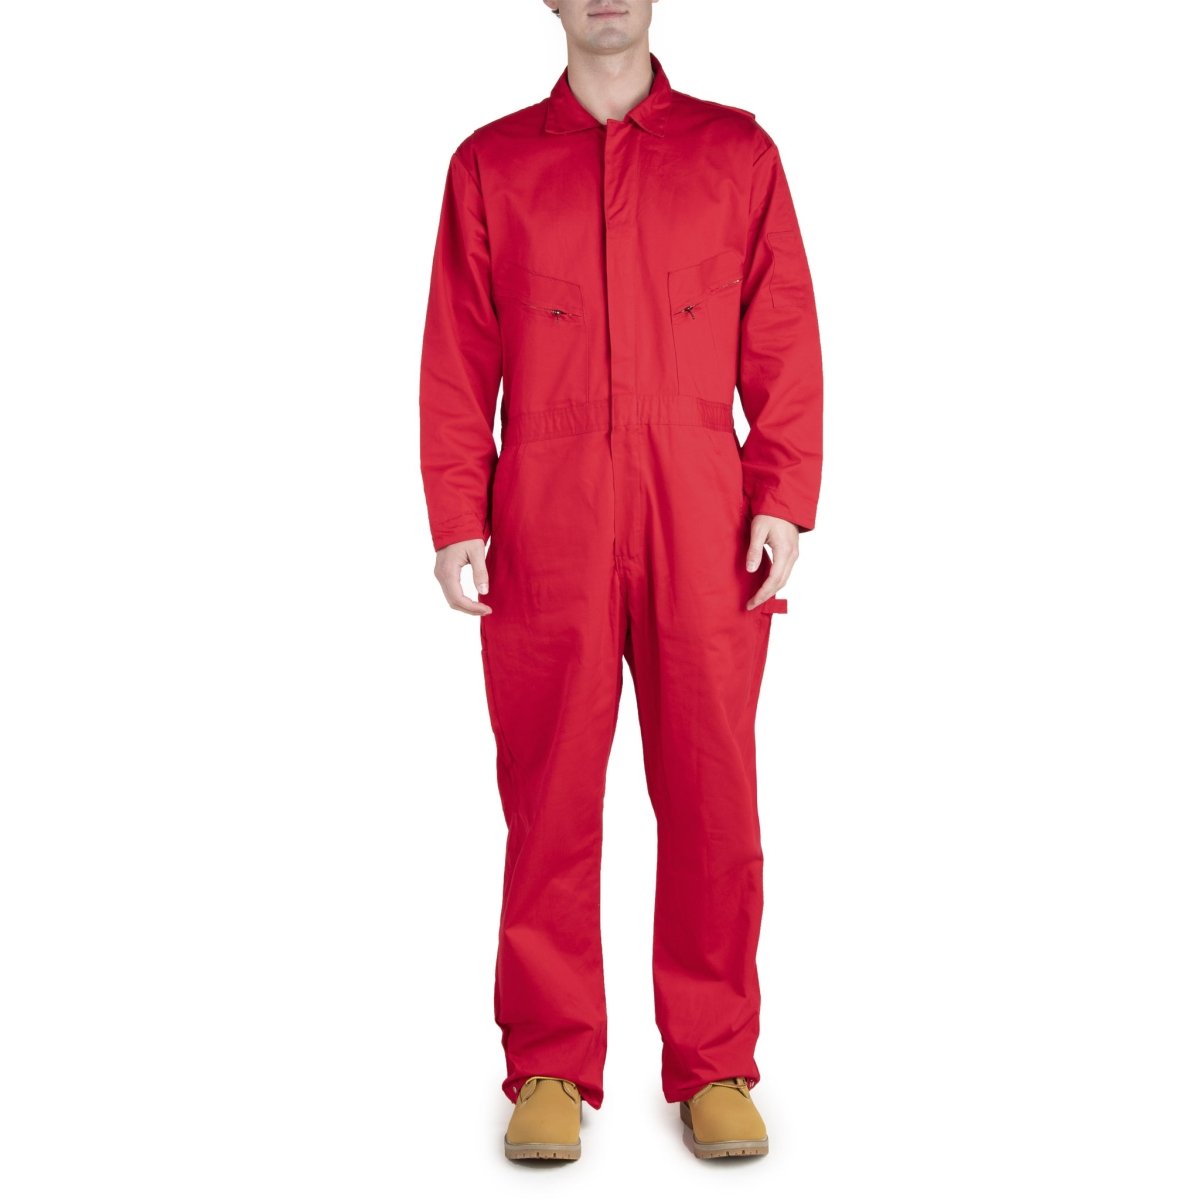 Deluxe Unlined Coverall - Berne Apparel